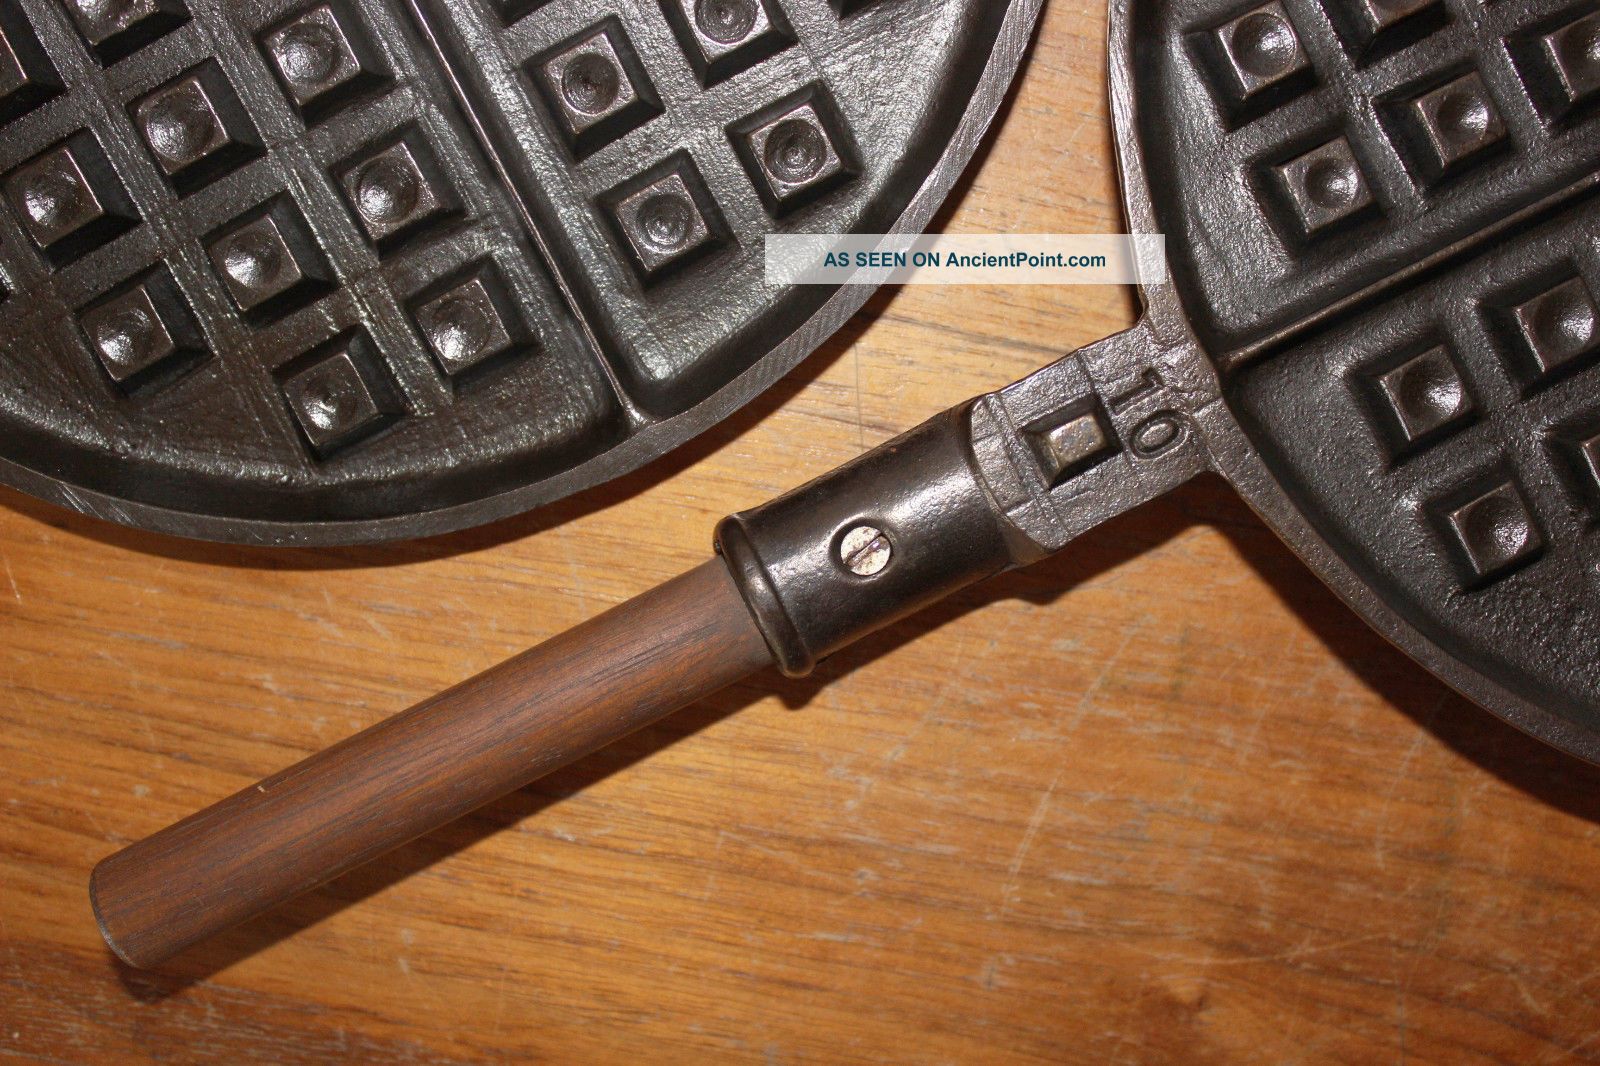 Griswold's 'The New American' No. 8 Waffle Iron 976/977 with Low